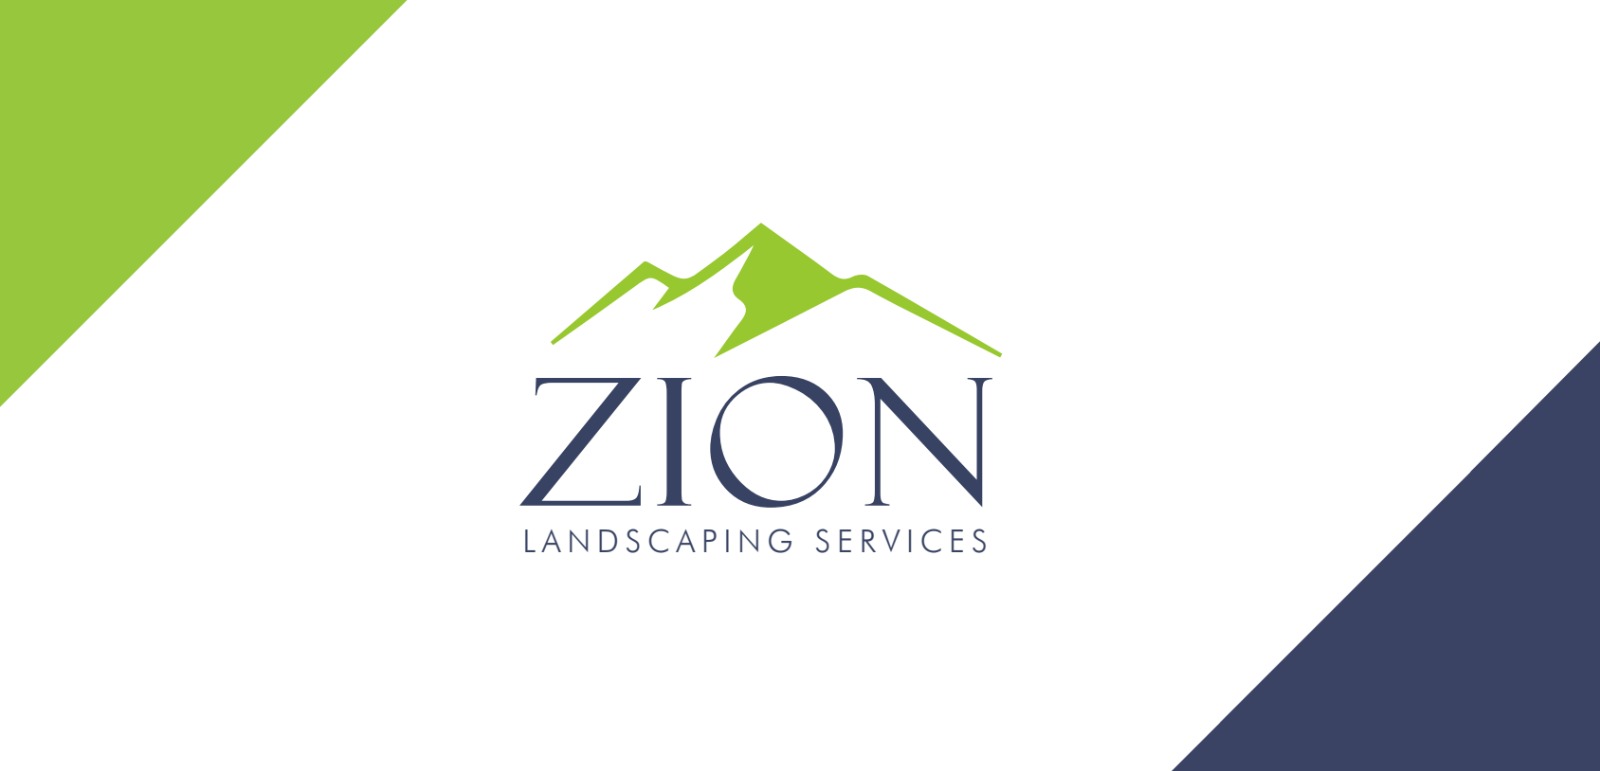 Zion Landscaping Services